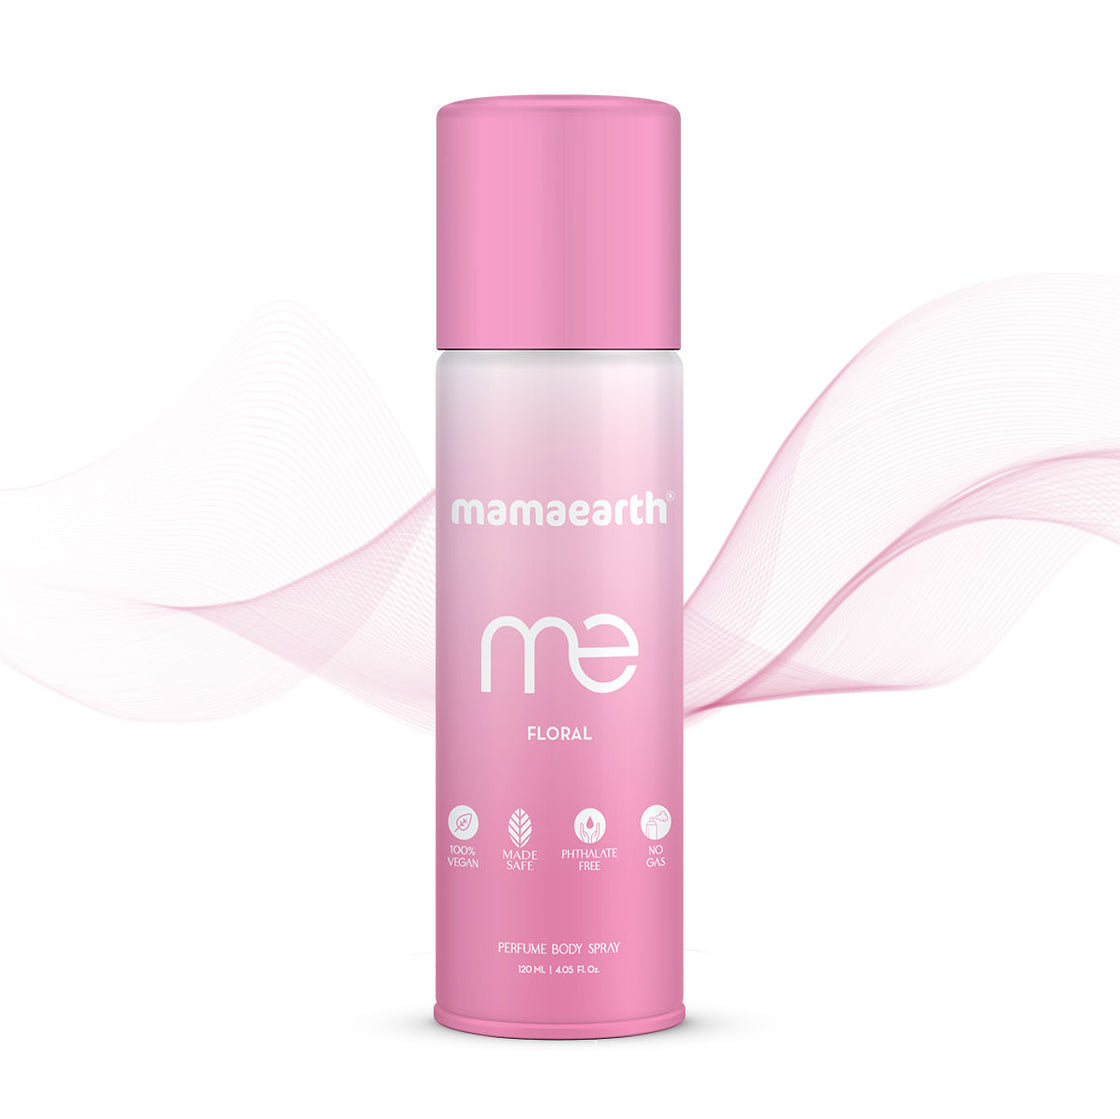 Mamaearth Me Floral Deodorant- For Her (120ml)